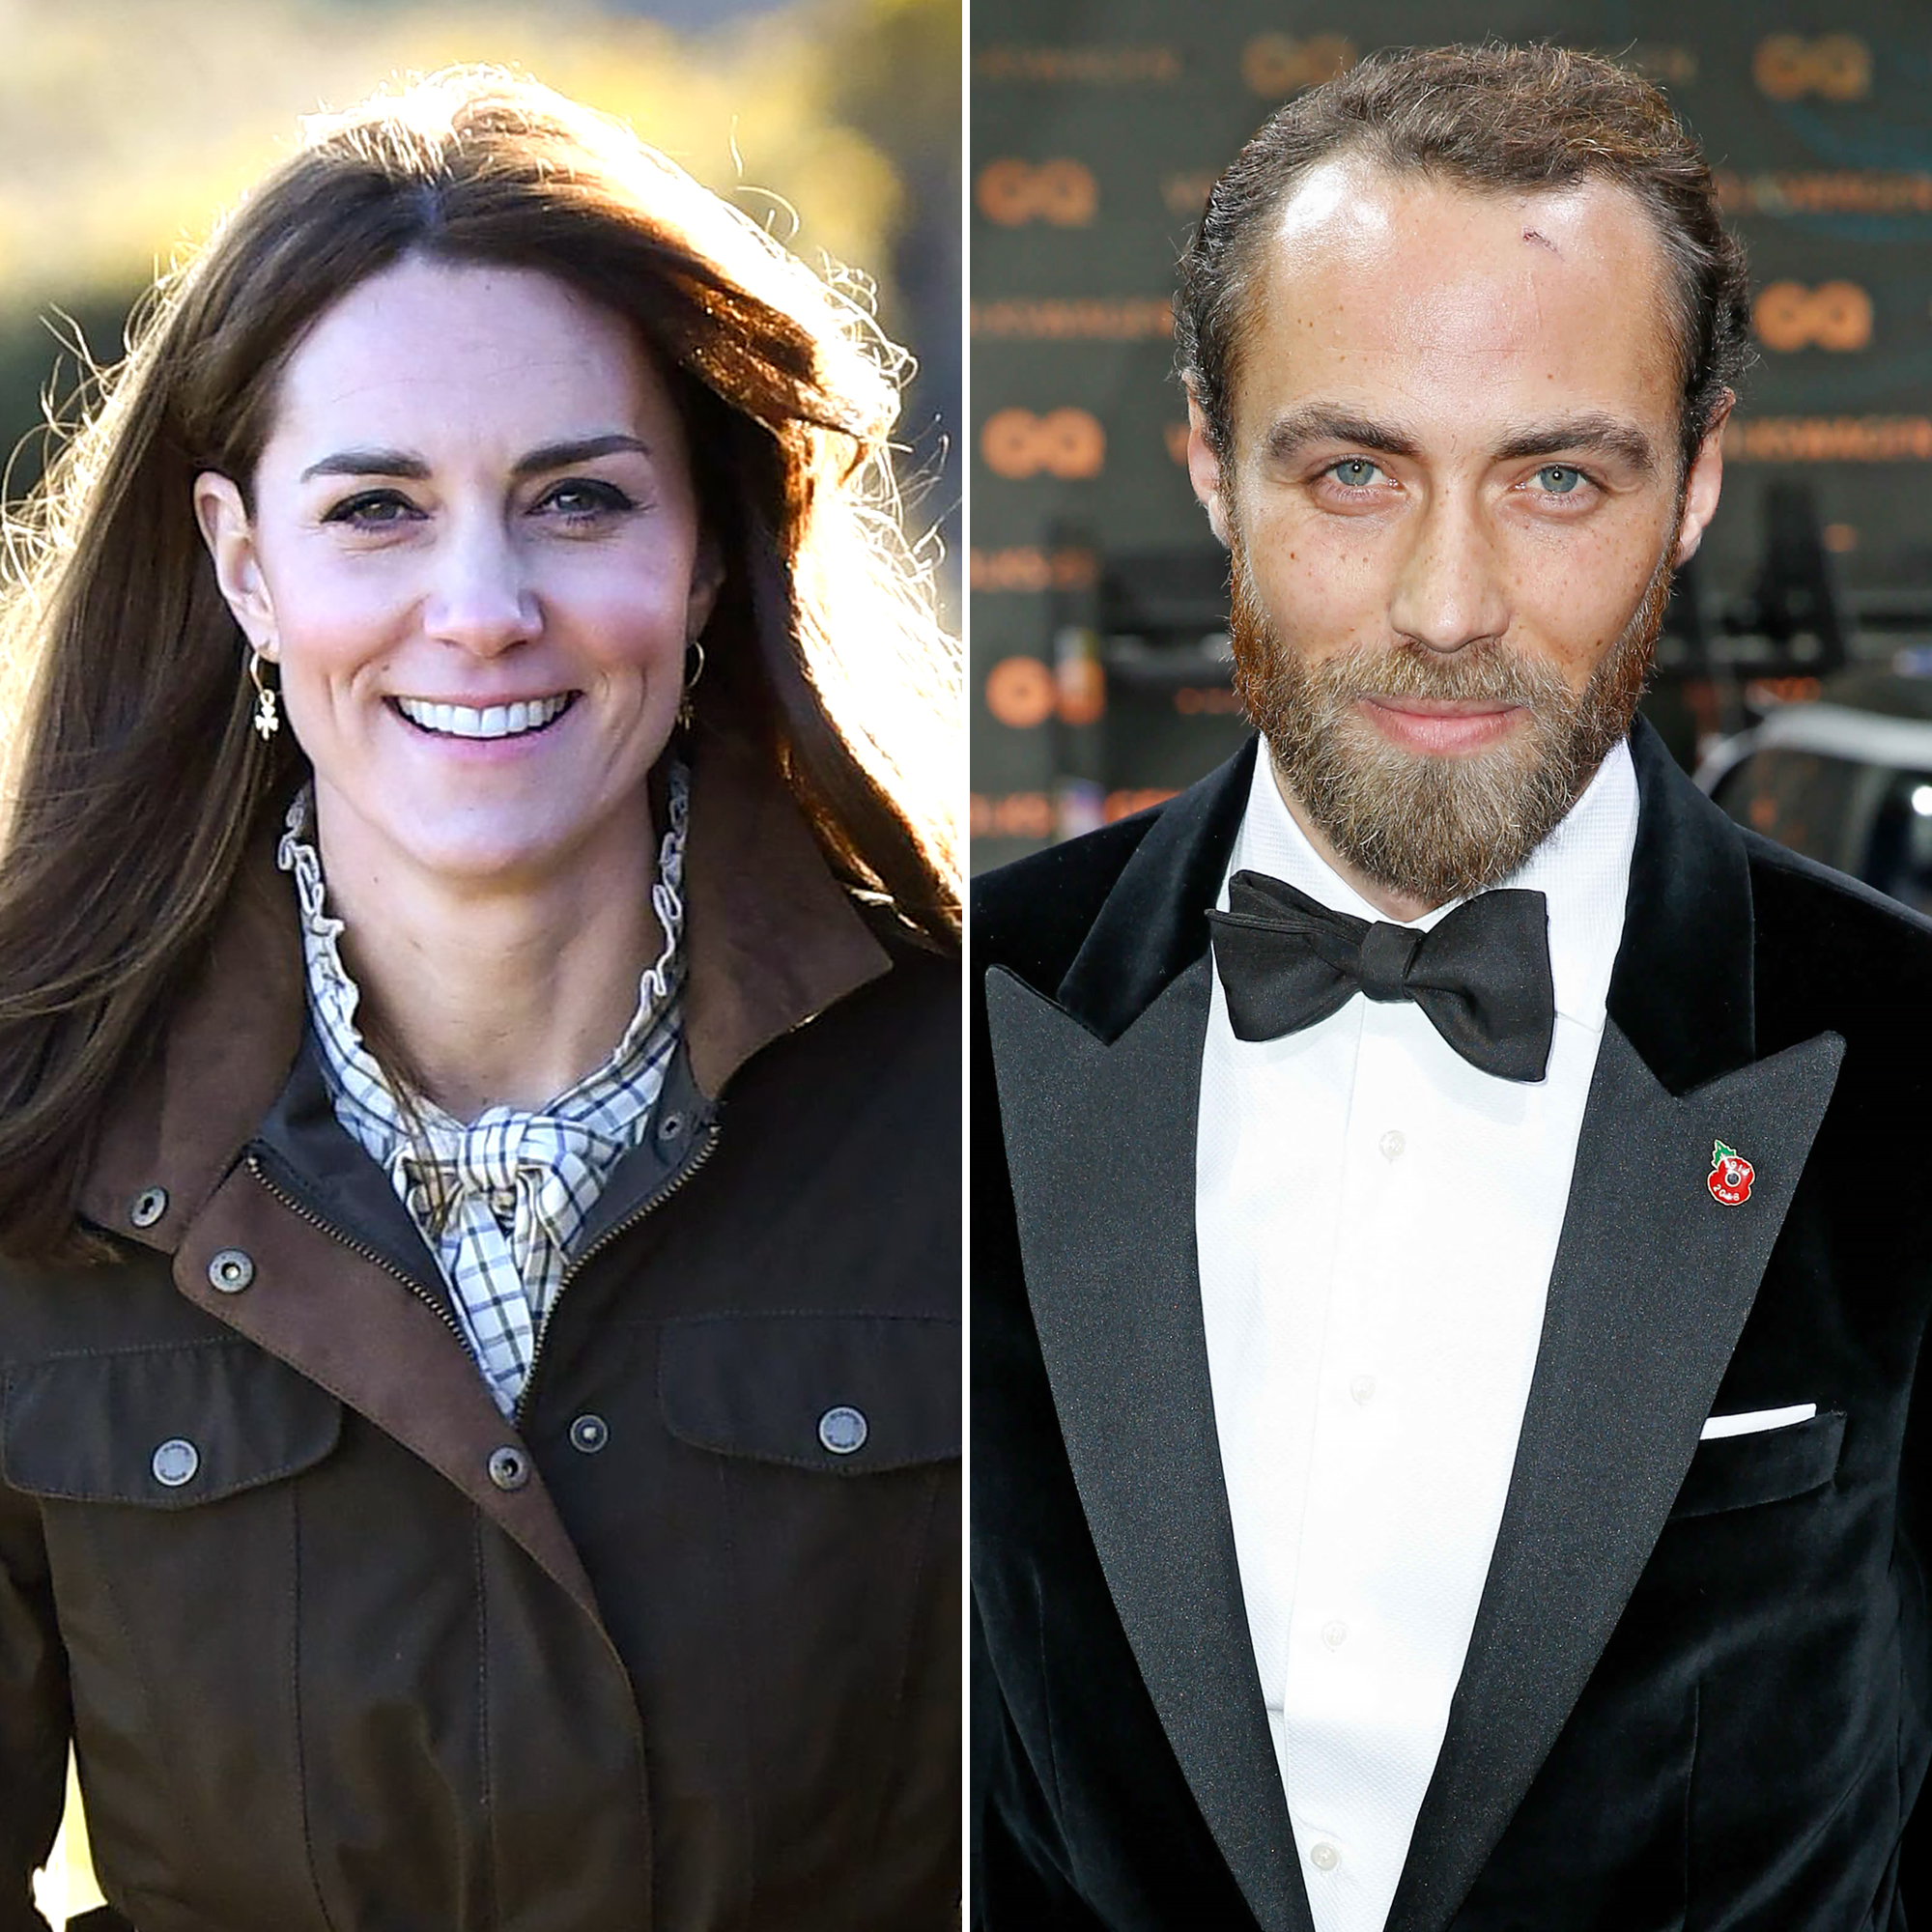 Kate Middleton Gave Her Brother the 'Most Gift in 2011